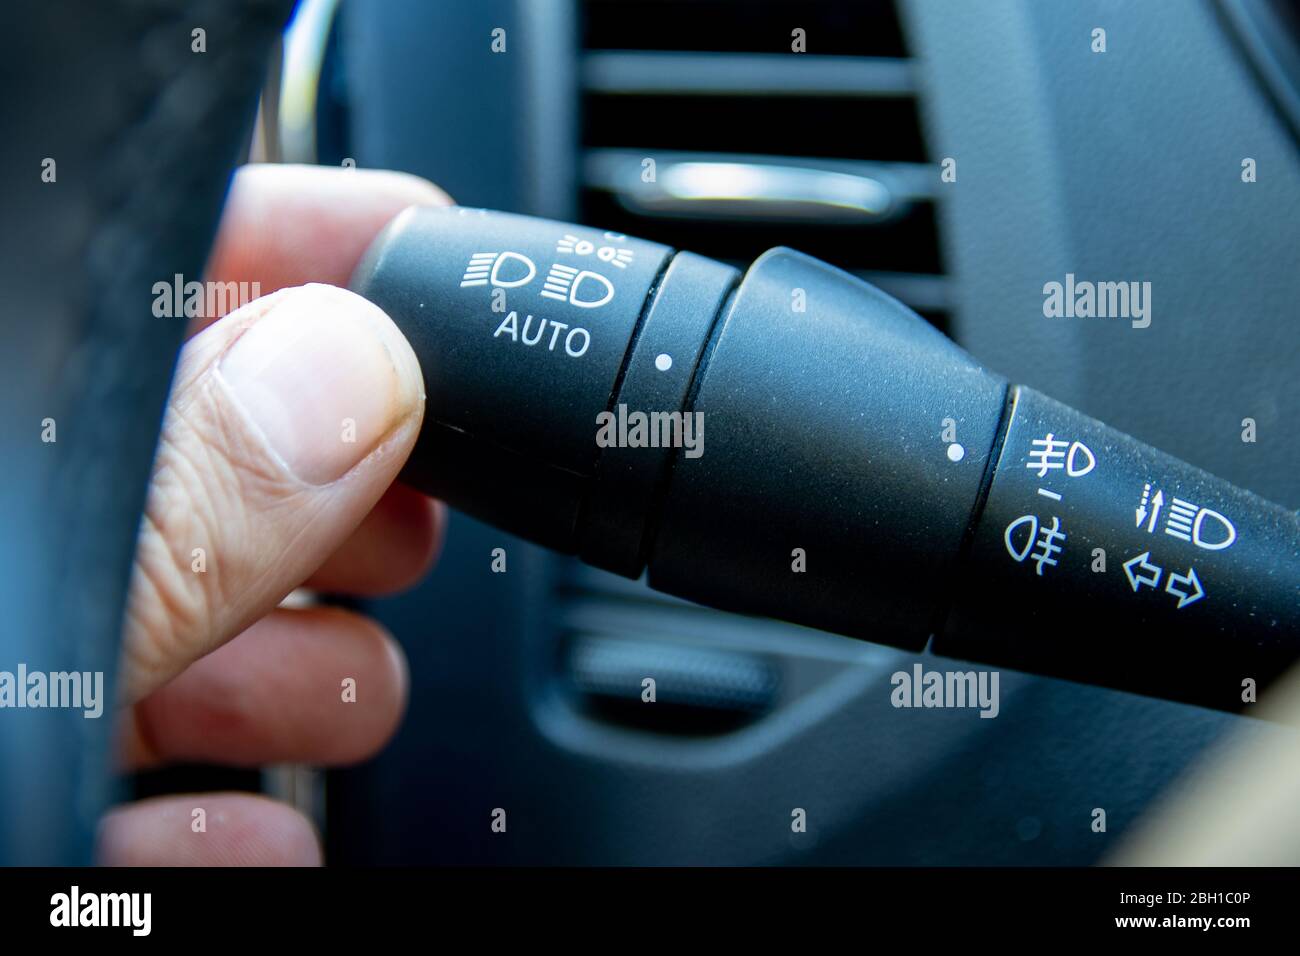 https://c8.alamy.com/comp/2BH1C0P/a-hand-on-an-indicator-stick-in-the-interior-of-a-car-also-used-to-turn-on-headlights-2BH1C0P.jpg